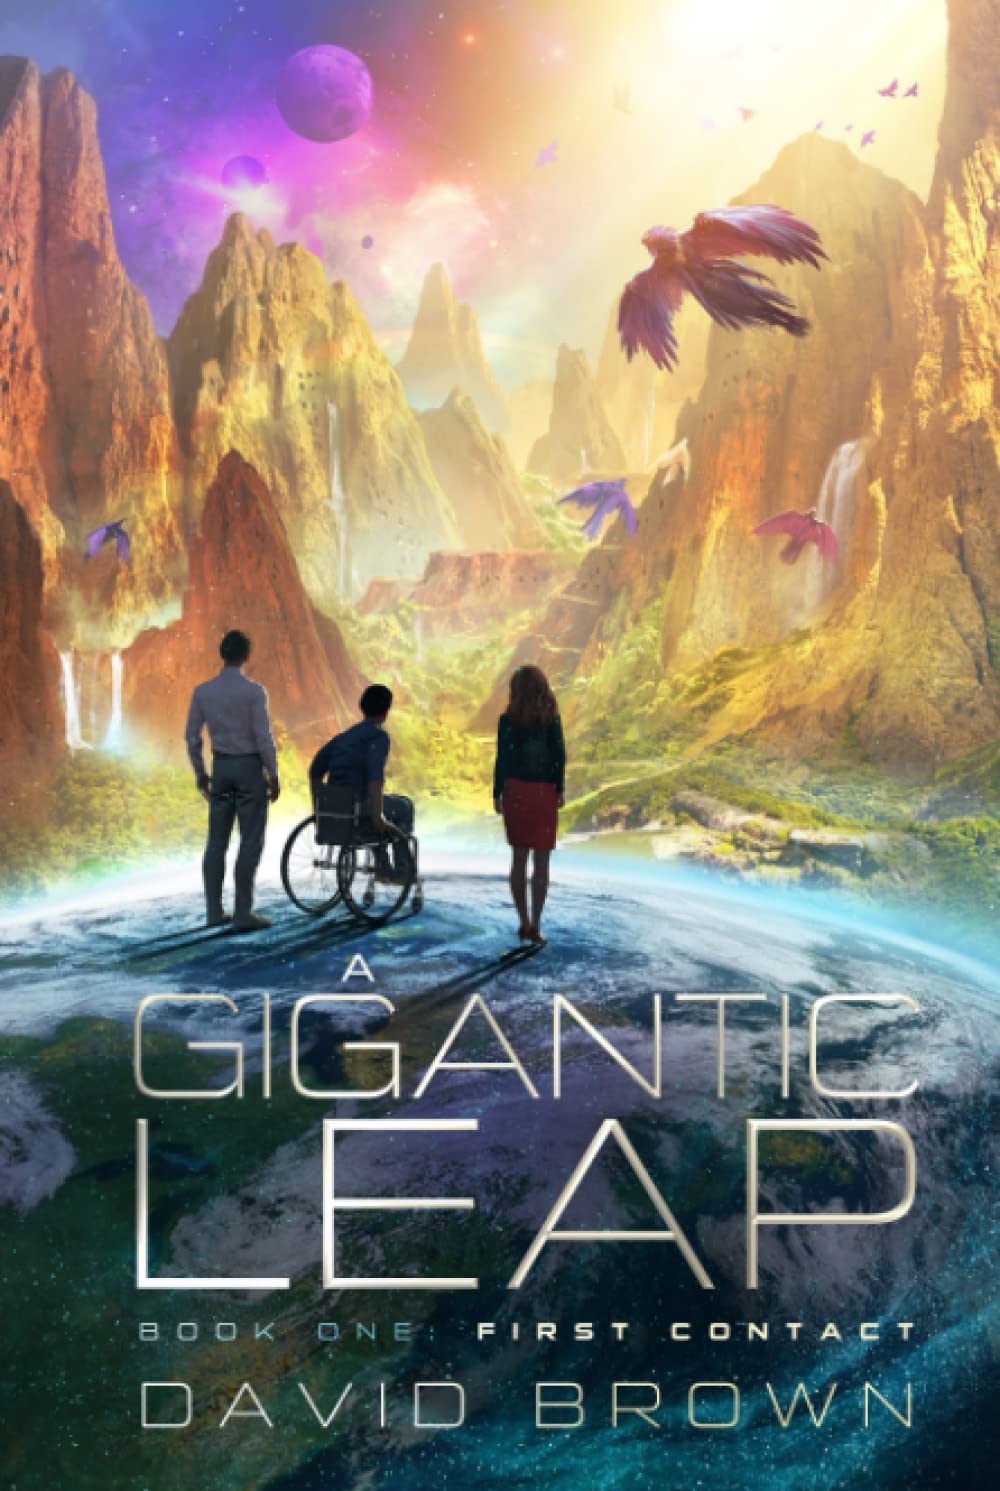 A Gigantic Leap: First Contact by David Brown